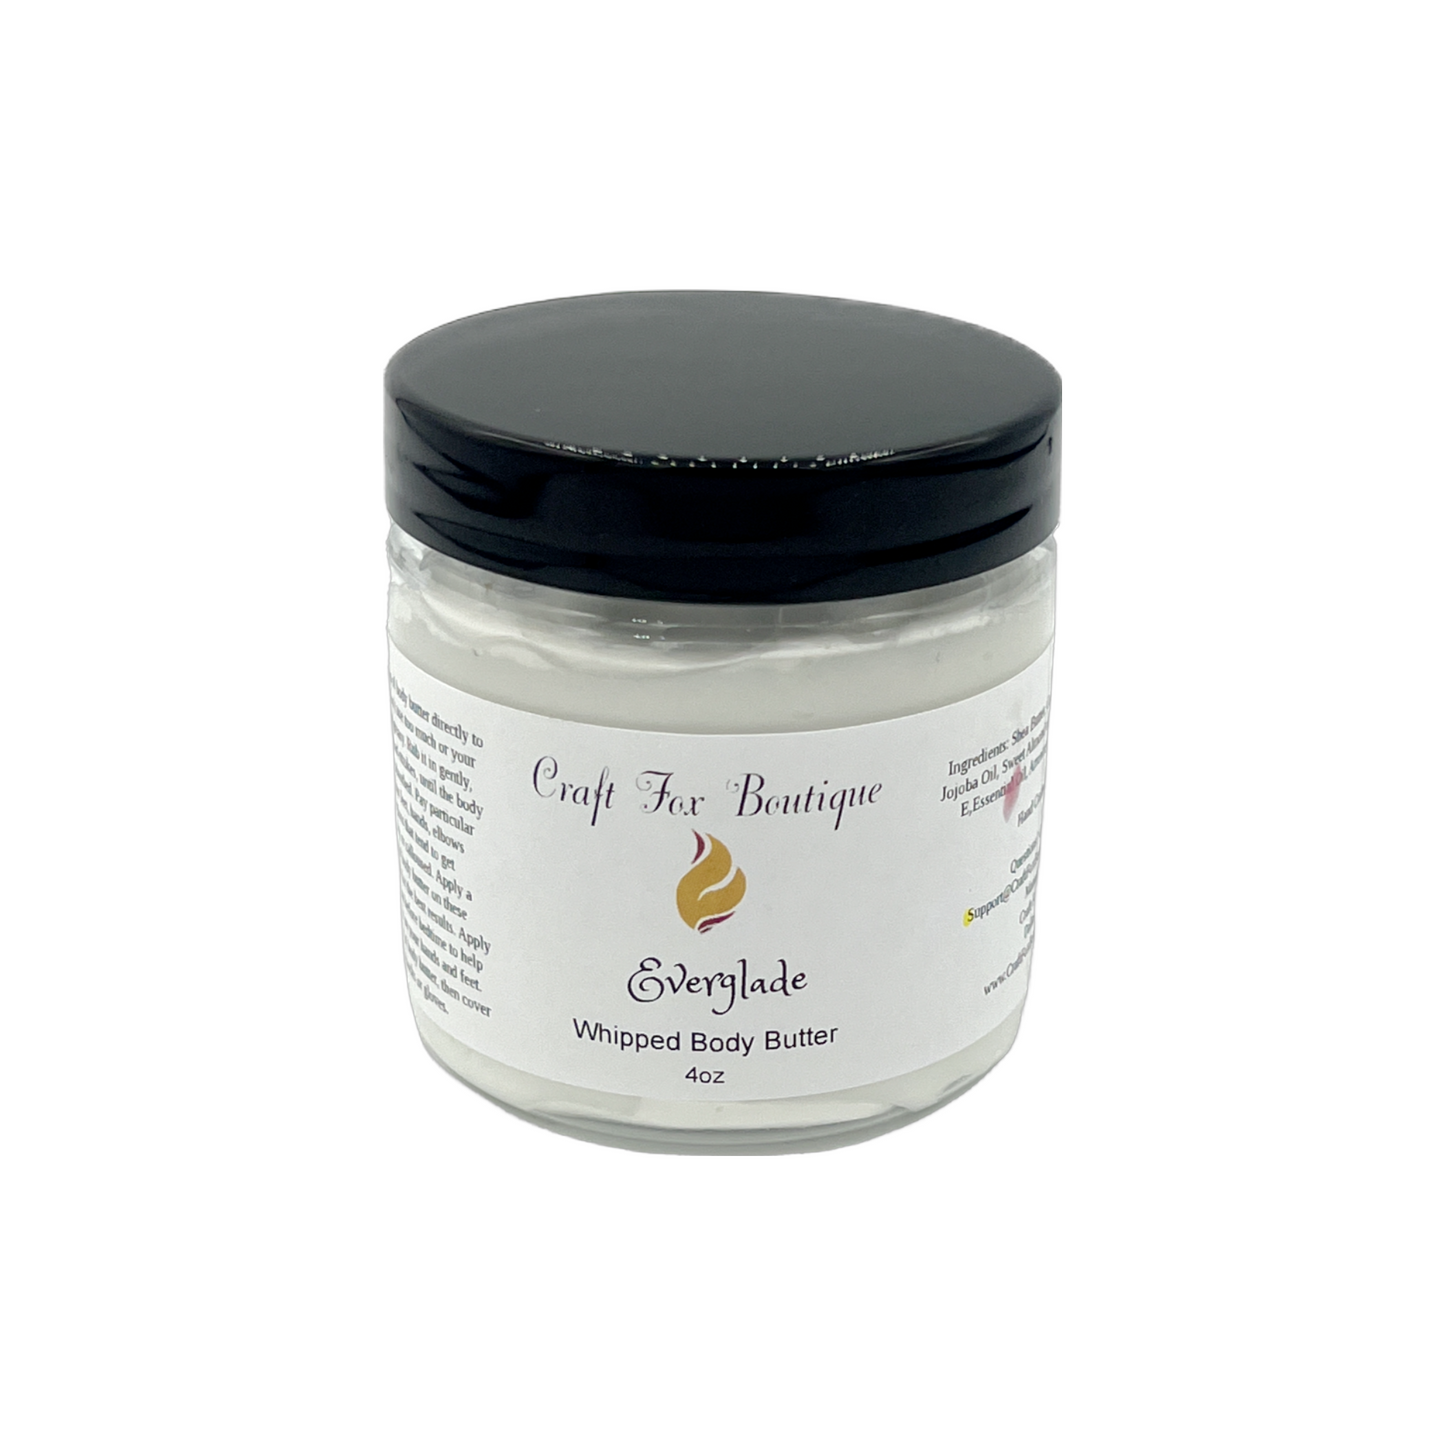 Everglade 4oz Whipped Body Butter